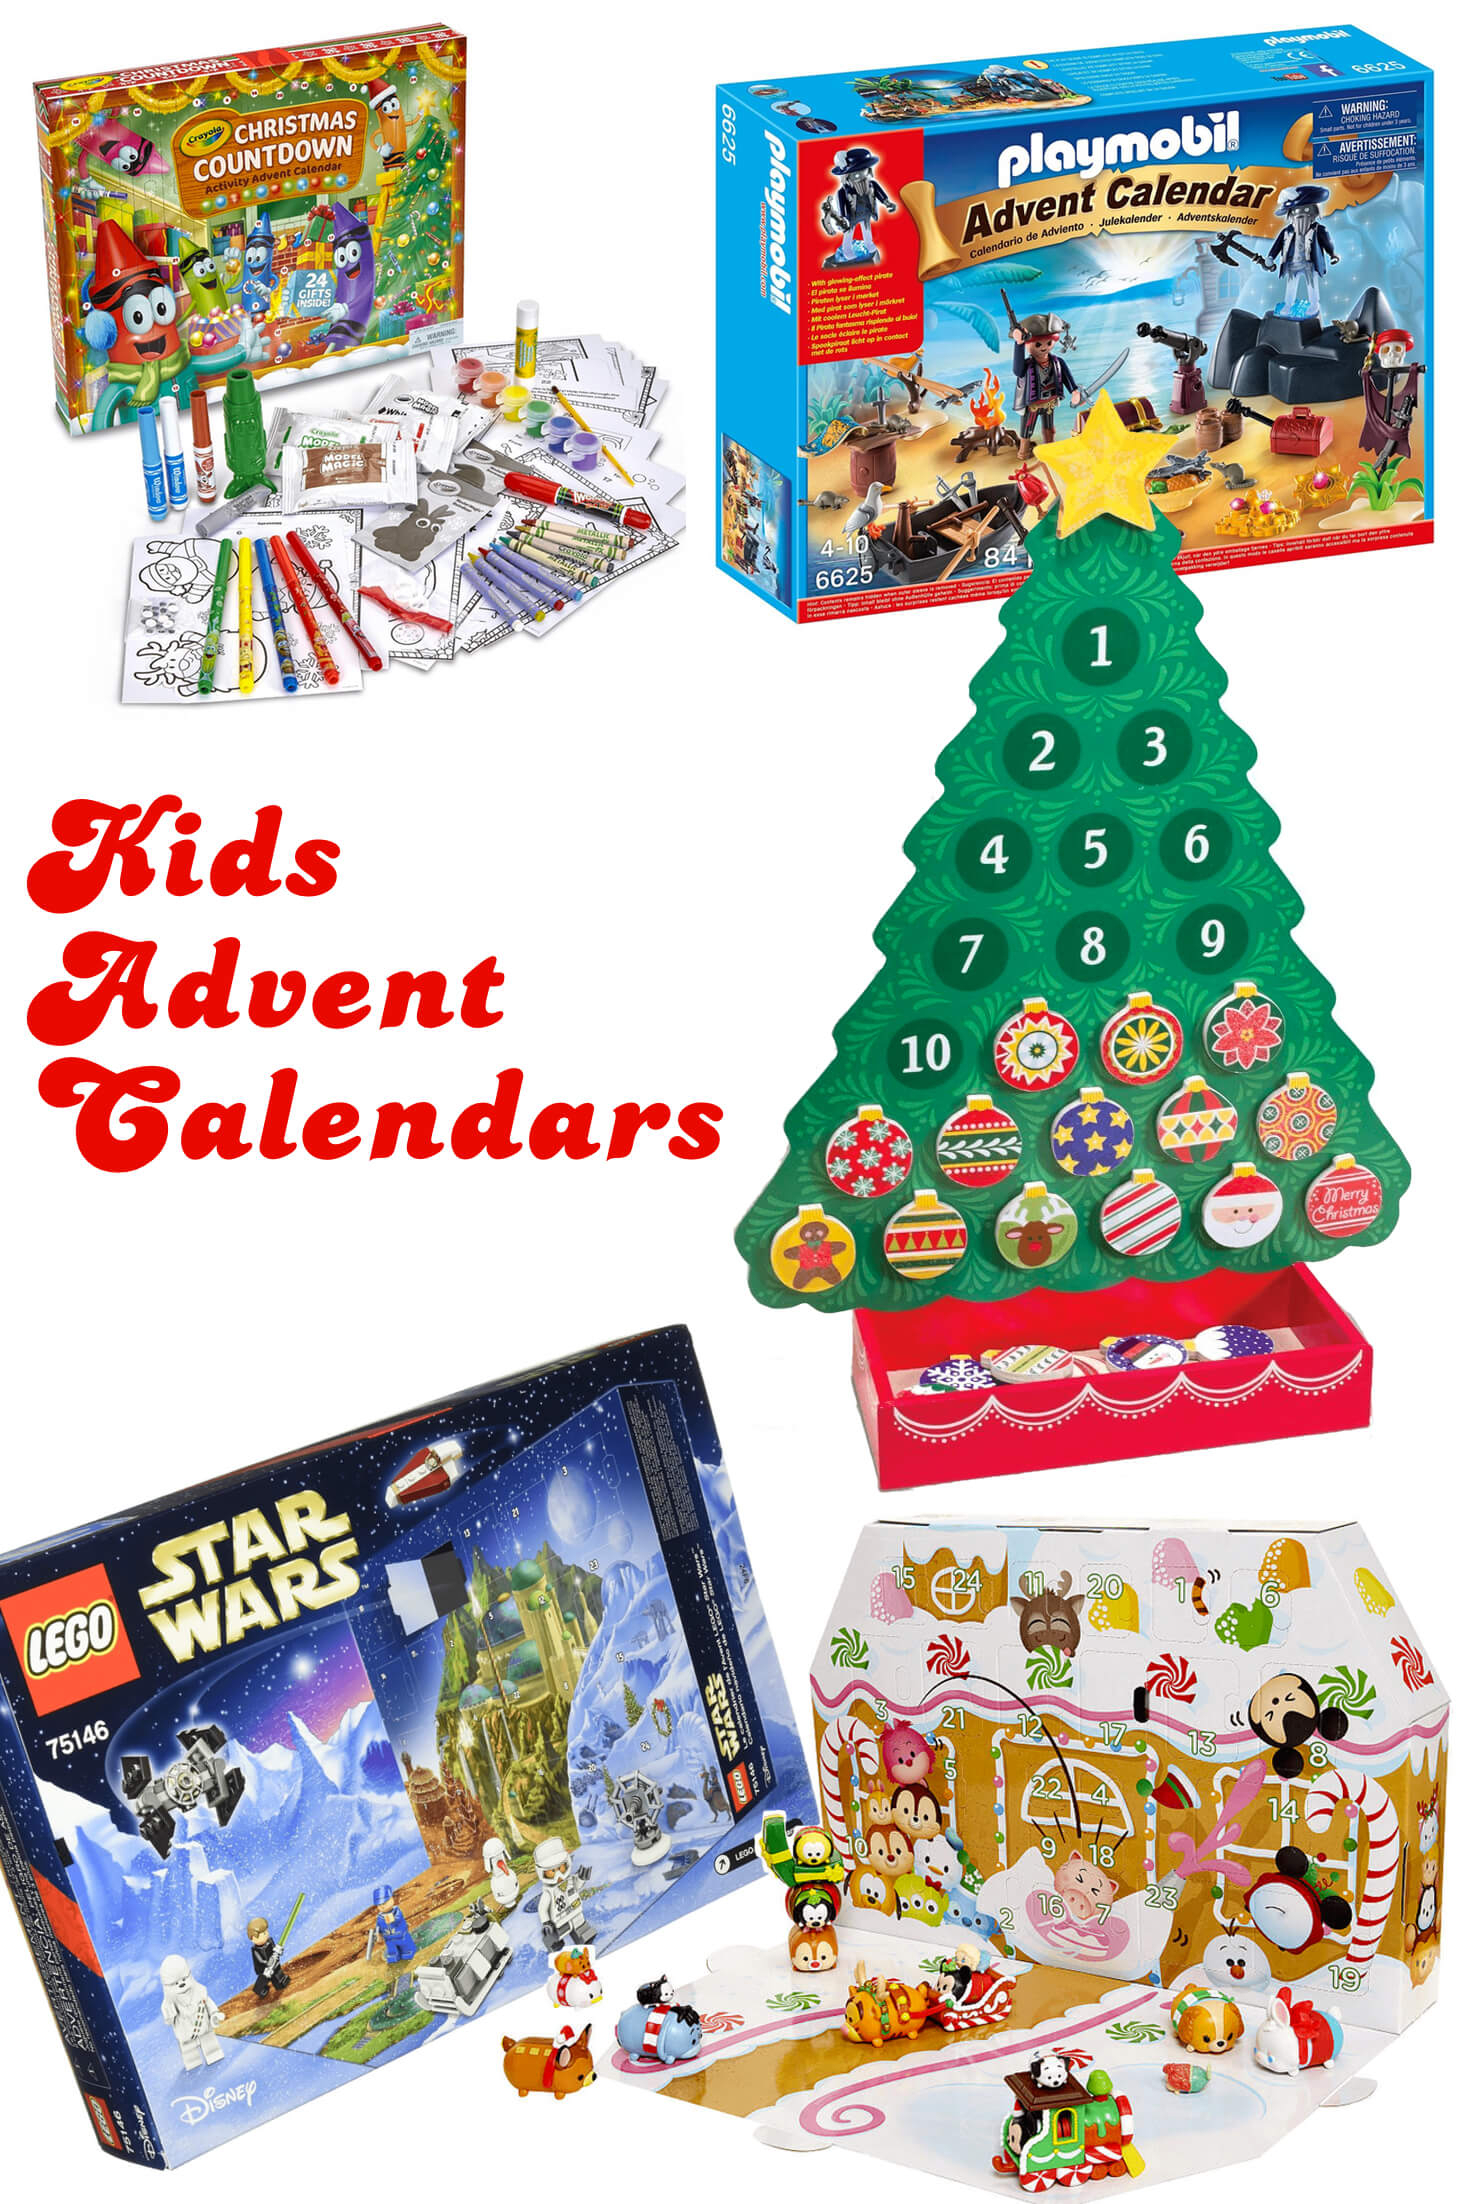 Best Toy Advent Calendars For Kids 2019! - Hello Subscription